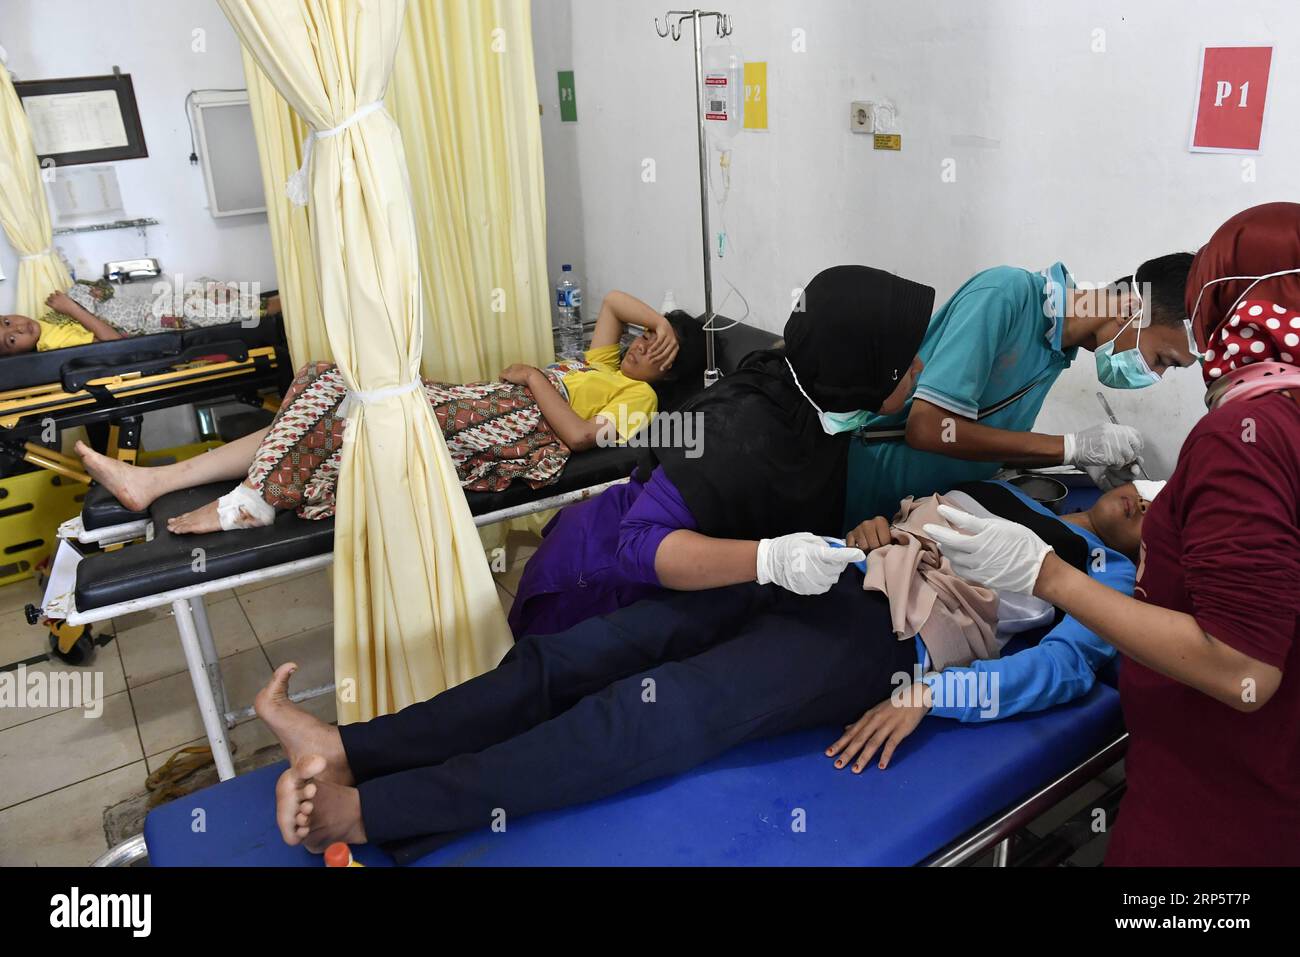 (181223) -- BANTEN, Dec. 23, 2018 -- Injured people receive treatment at Cinangka clinic after a tsunami hit Sunda Strait in Pandeglang, Banten province, in Indonesia, Dec. 23, 2018. The total casualty of a tsunami triggered by the eruption of Krakatau Child volcano has increased to 168 people in coastal areas of Sunda Strait of western Indonesia, disaster agency official said here on Sunday. The catastrophe killed at least 168 people, wounded at least 745 ones and collapsed a total of 430 houses and nine hotels, and caused damages to scores of ships. ) INDONESIA-BANTEN-TSUNAMI-AFTERMATH Wahyu Stock Photo